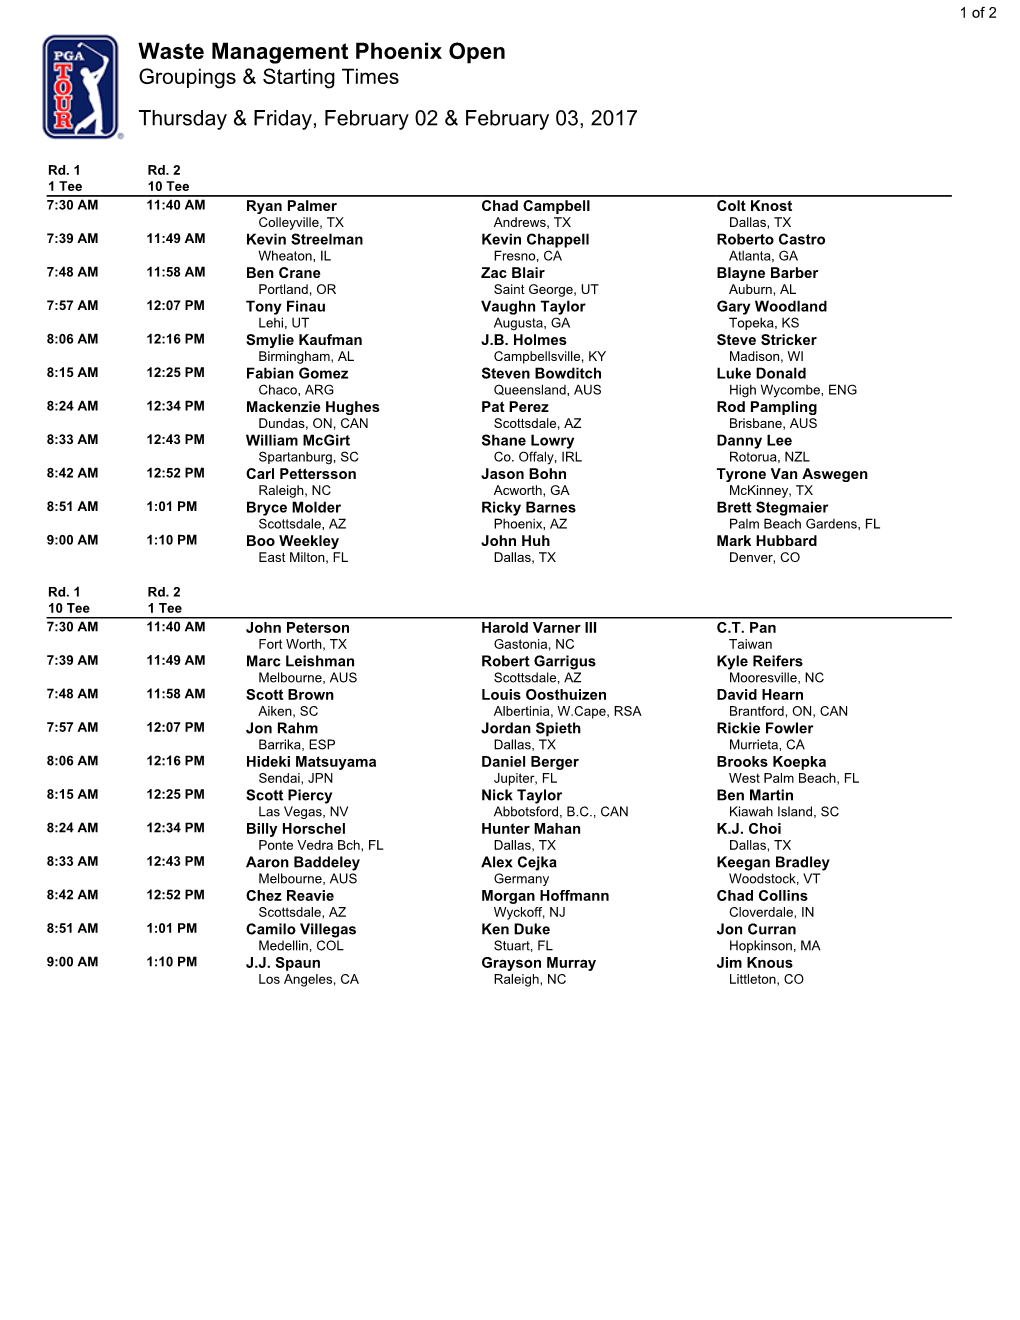 Waste Management Phoenix Open Groupings & Starting Times Thursday & Friday, February 02 & February 03, 2017